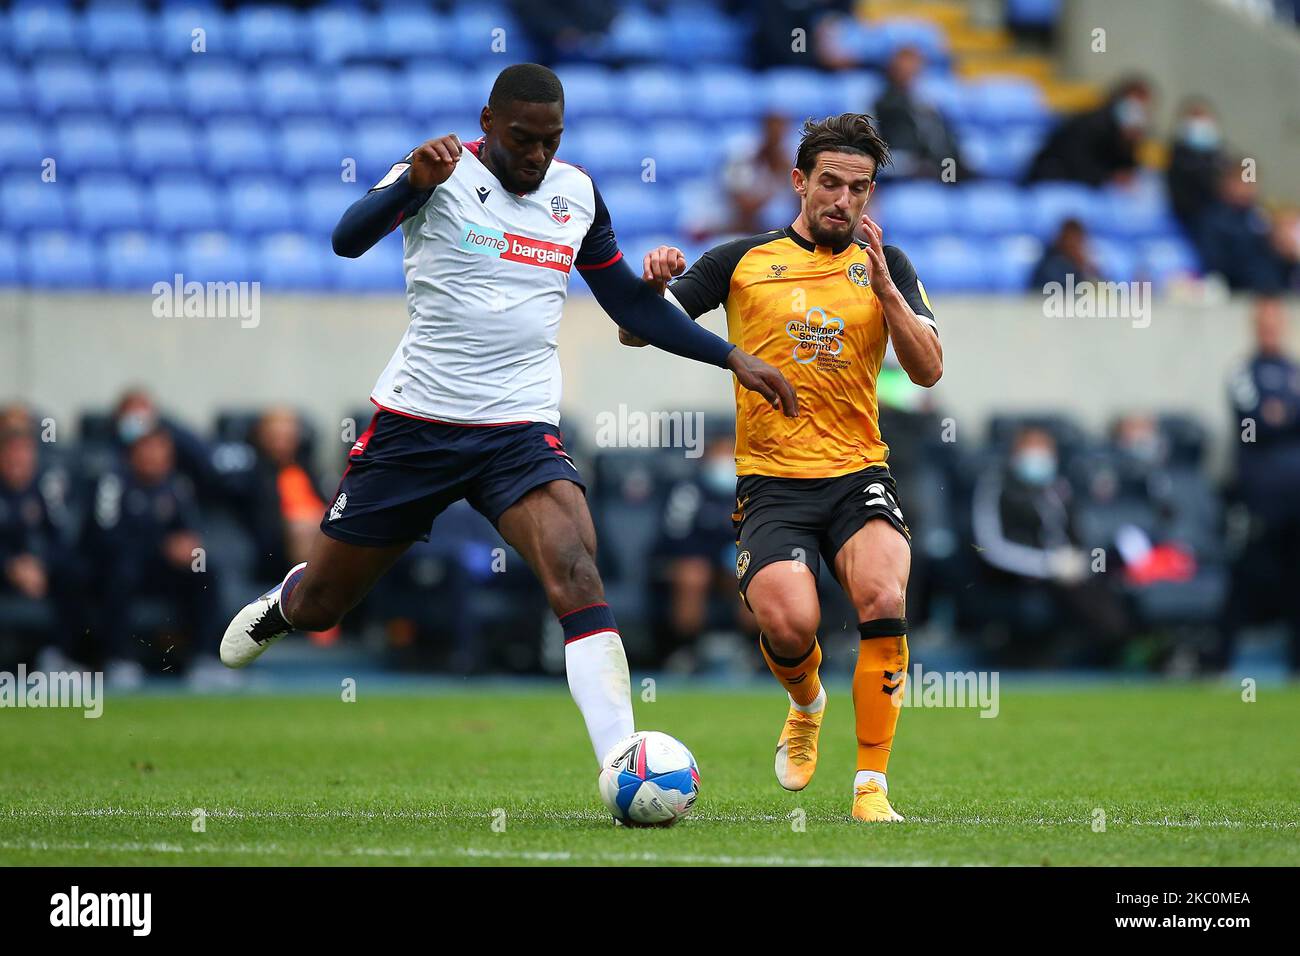 Boltons Ricardo Almeida Santos battles with Newports Ryan Haynes during the Sky Bet League 2 match between Bolton Wanderers and Newport County at the Reebok Stadium, Bolton, England on 26th September 2020. (Photo by Chris Donnelly/MI News/NurPhoto) Stock Photo